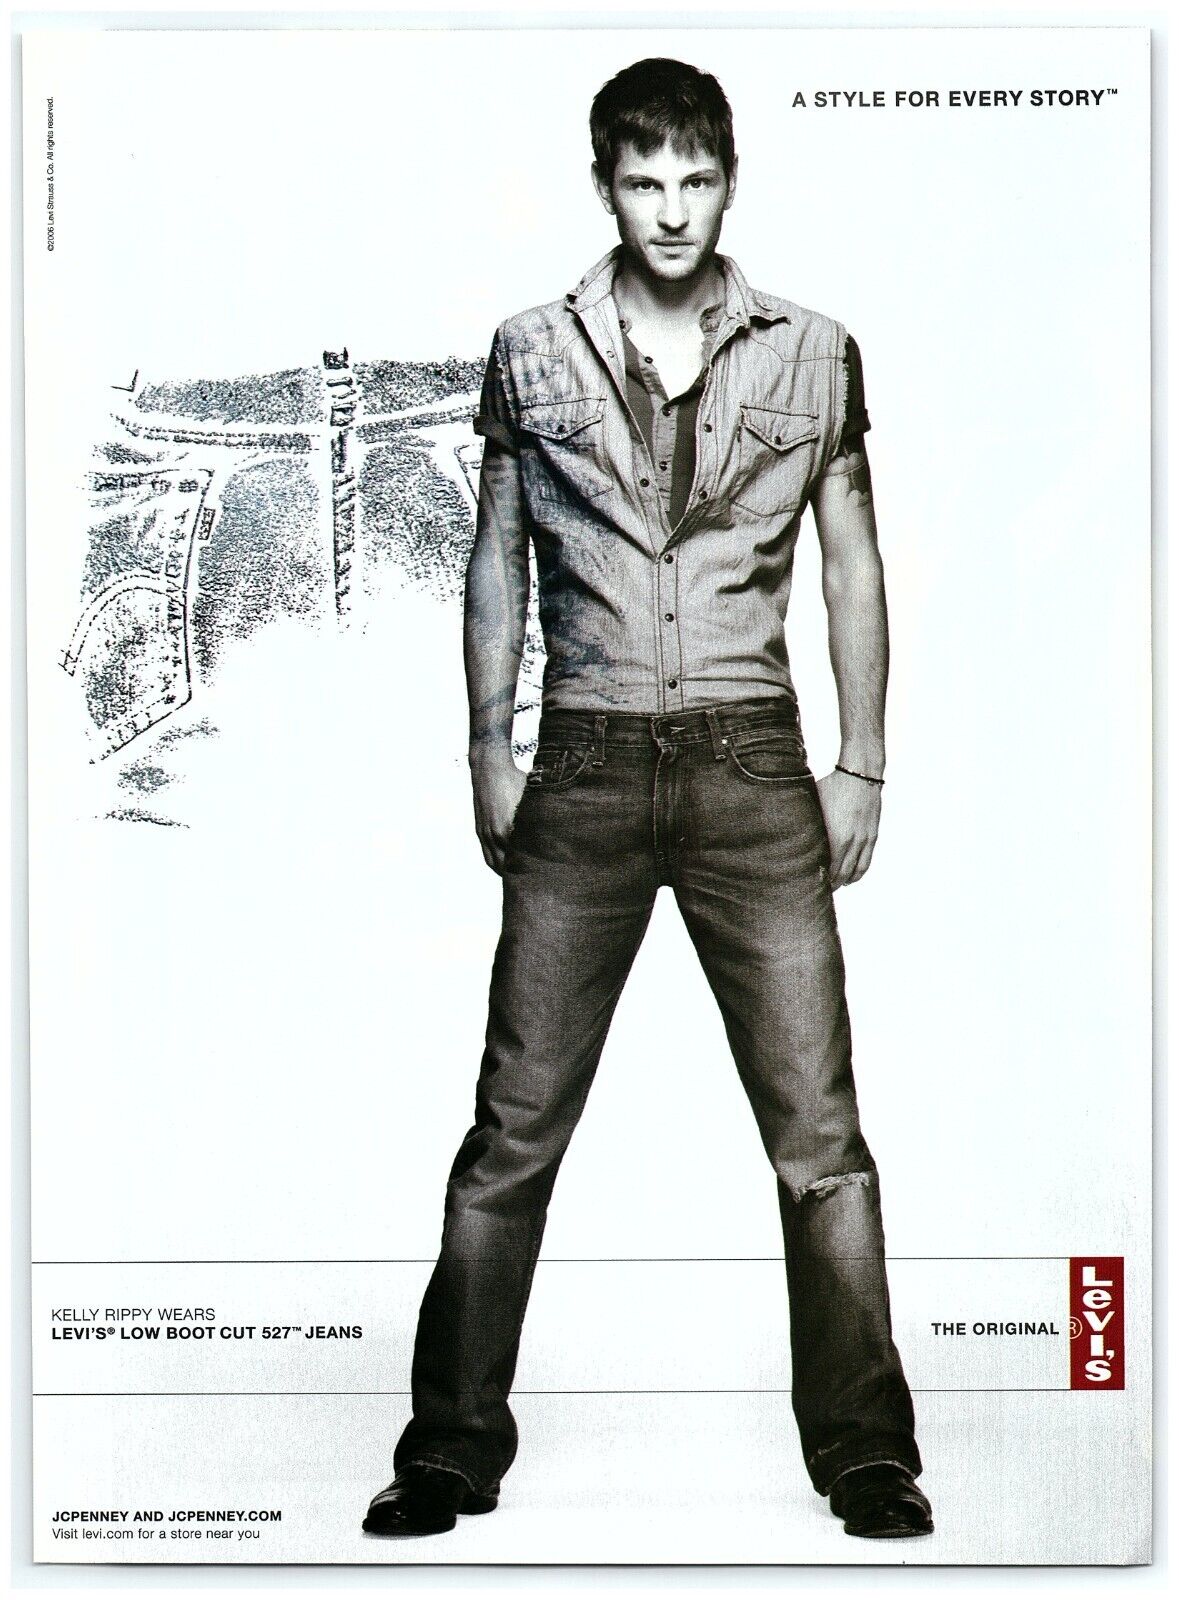 2006 Levi\'s Denim Print Ad, Kelly Rippy Low Boot Cut 527 Jeans Style Every Story